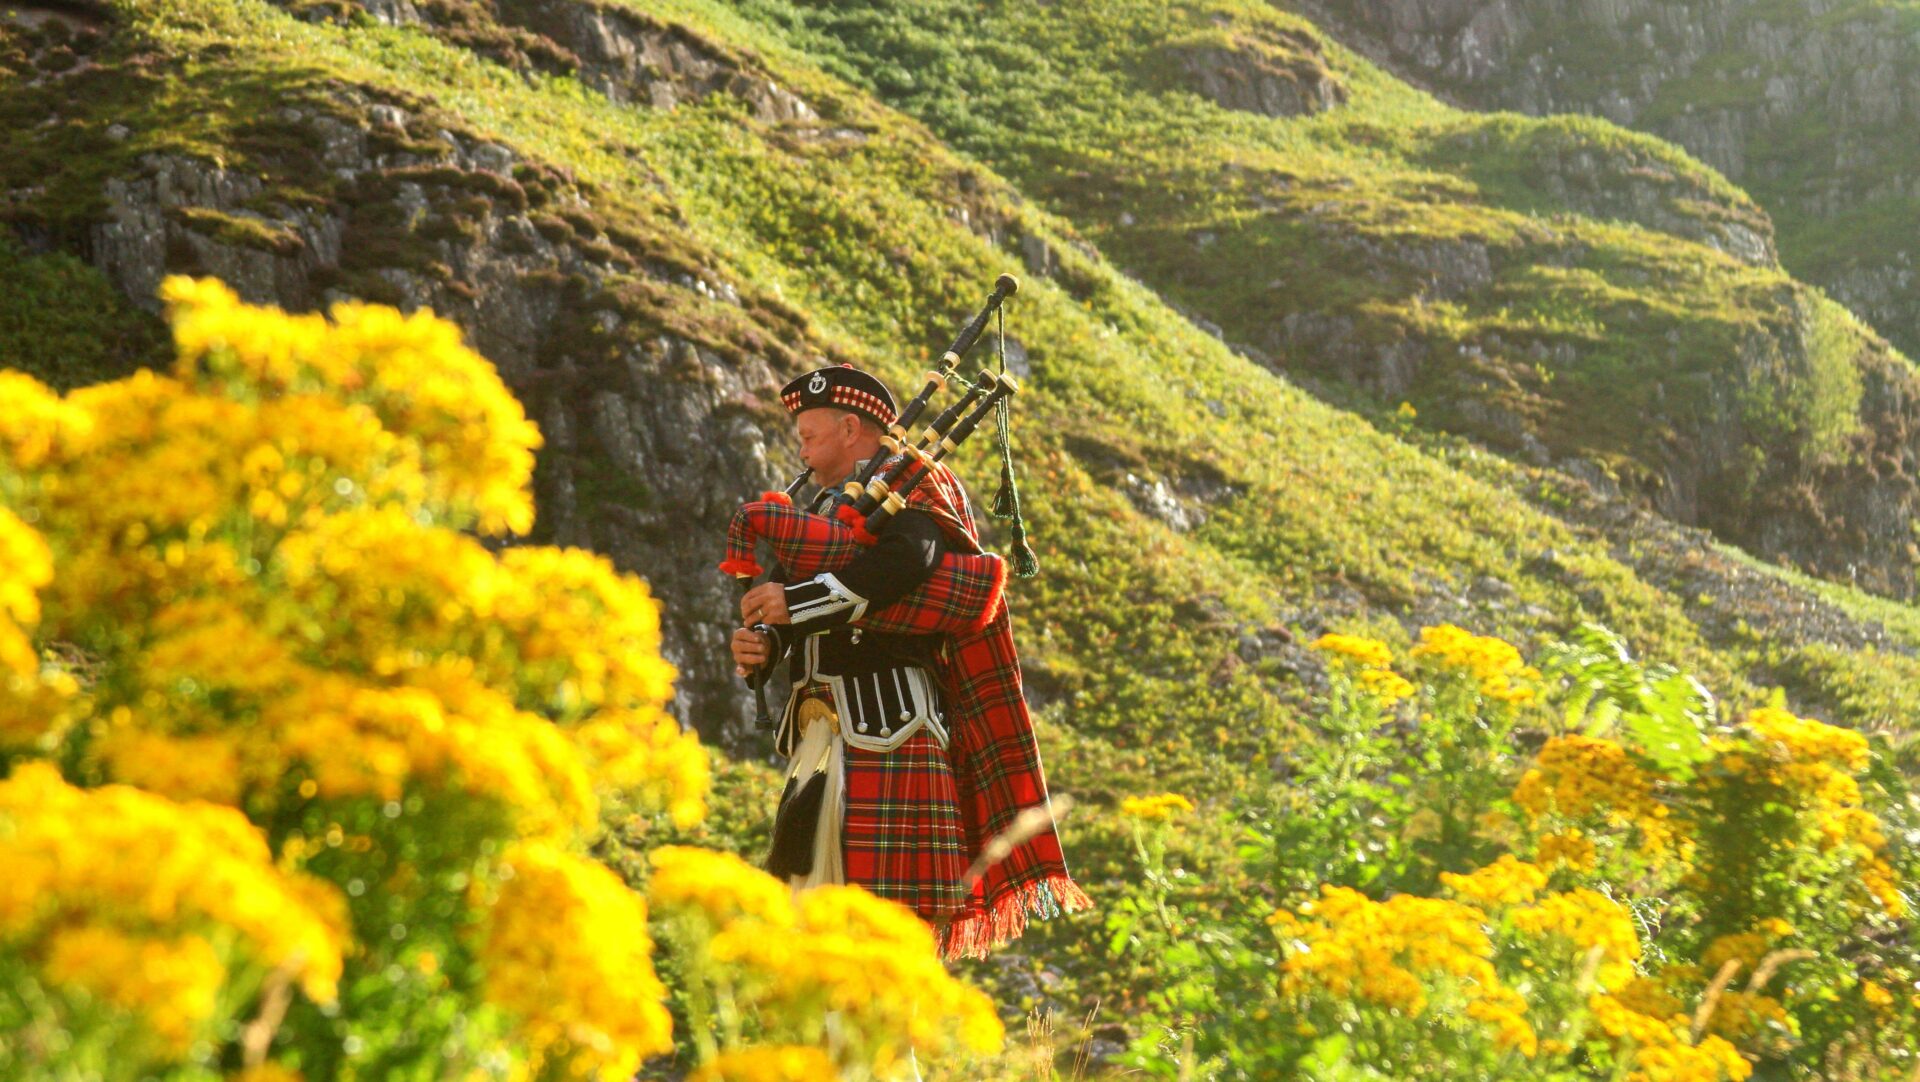 The Scot plays music on the mountain